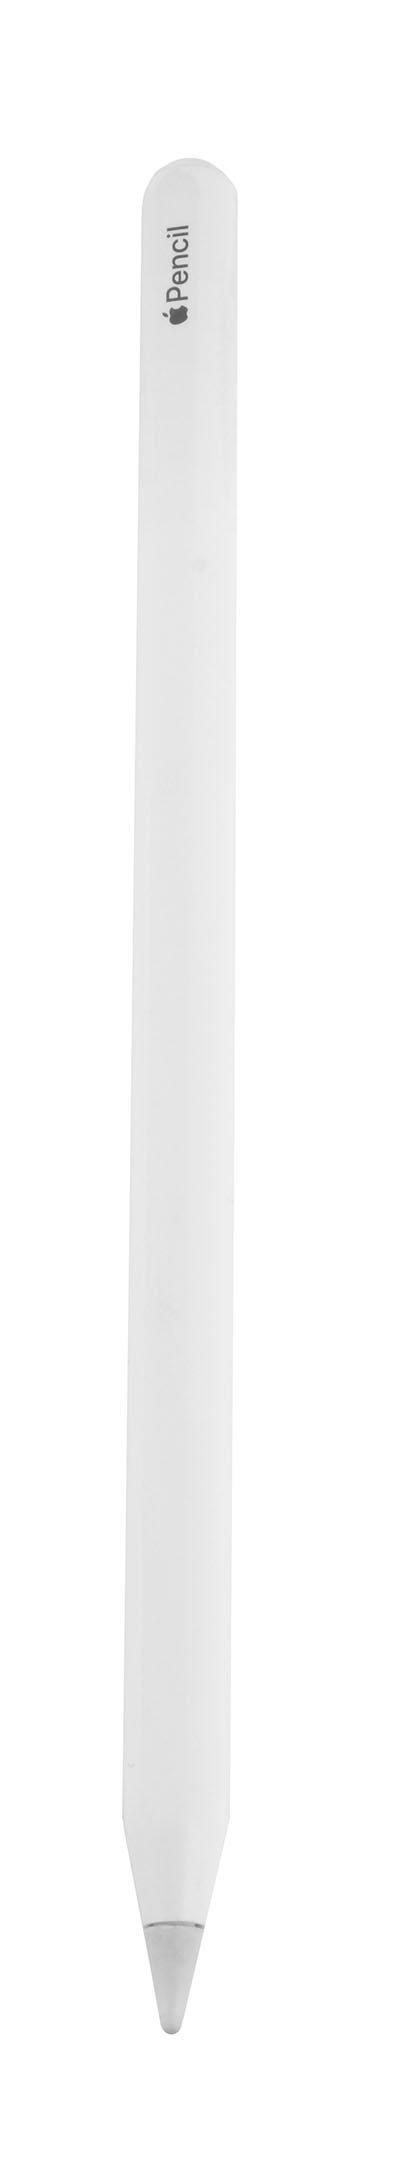 Apple Pencil (2nd Generation), White - eXtra